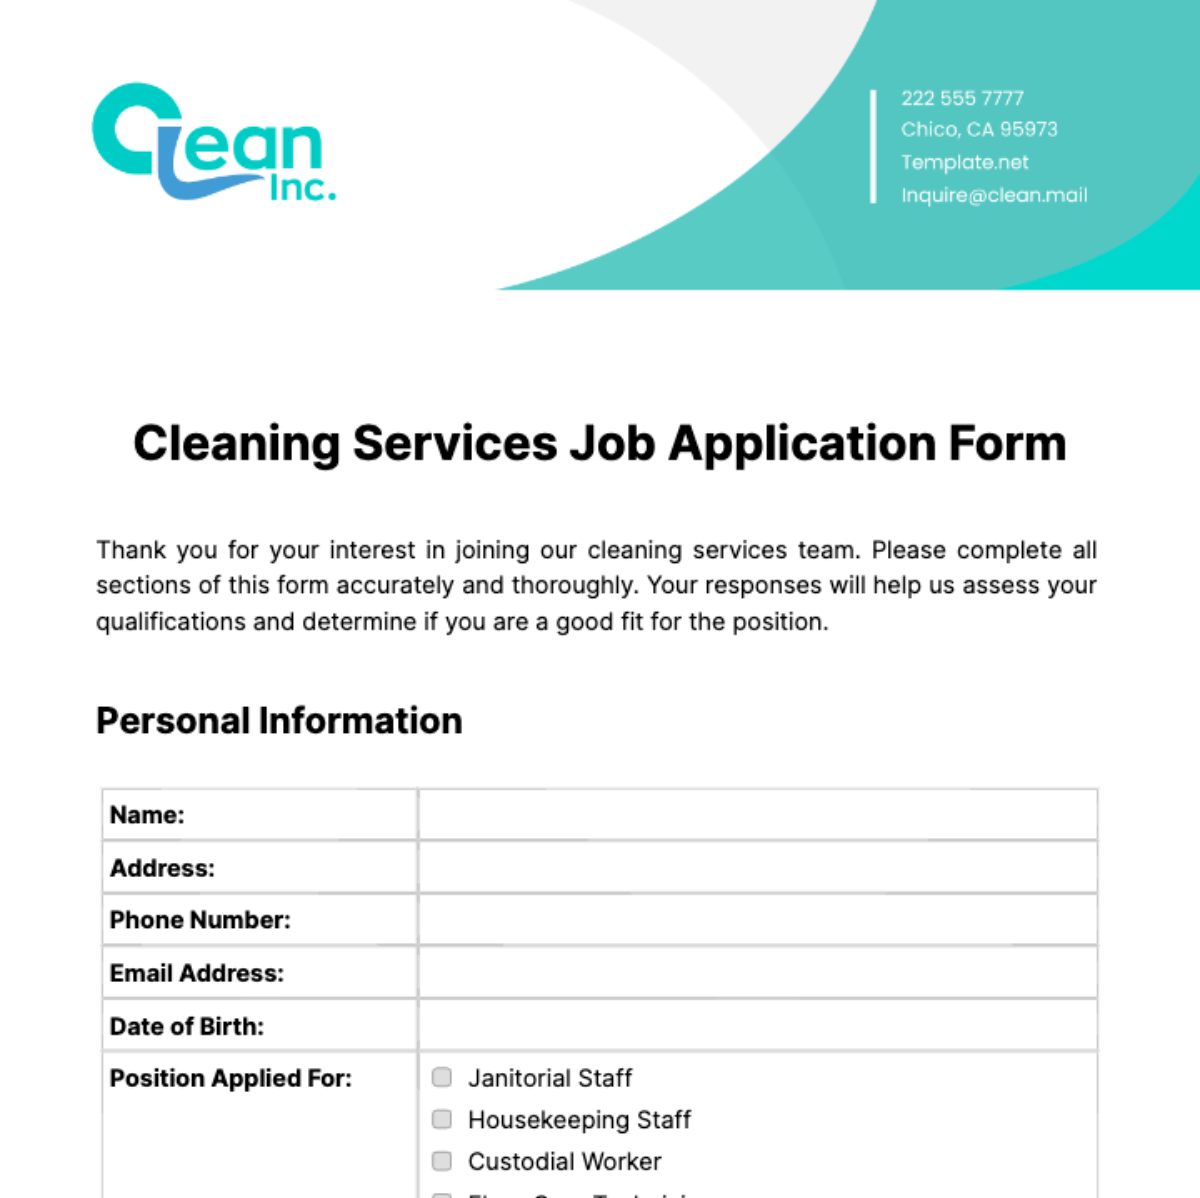 Cleaning Services Job Application Form Template